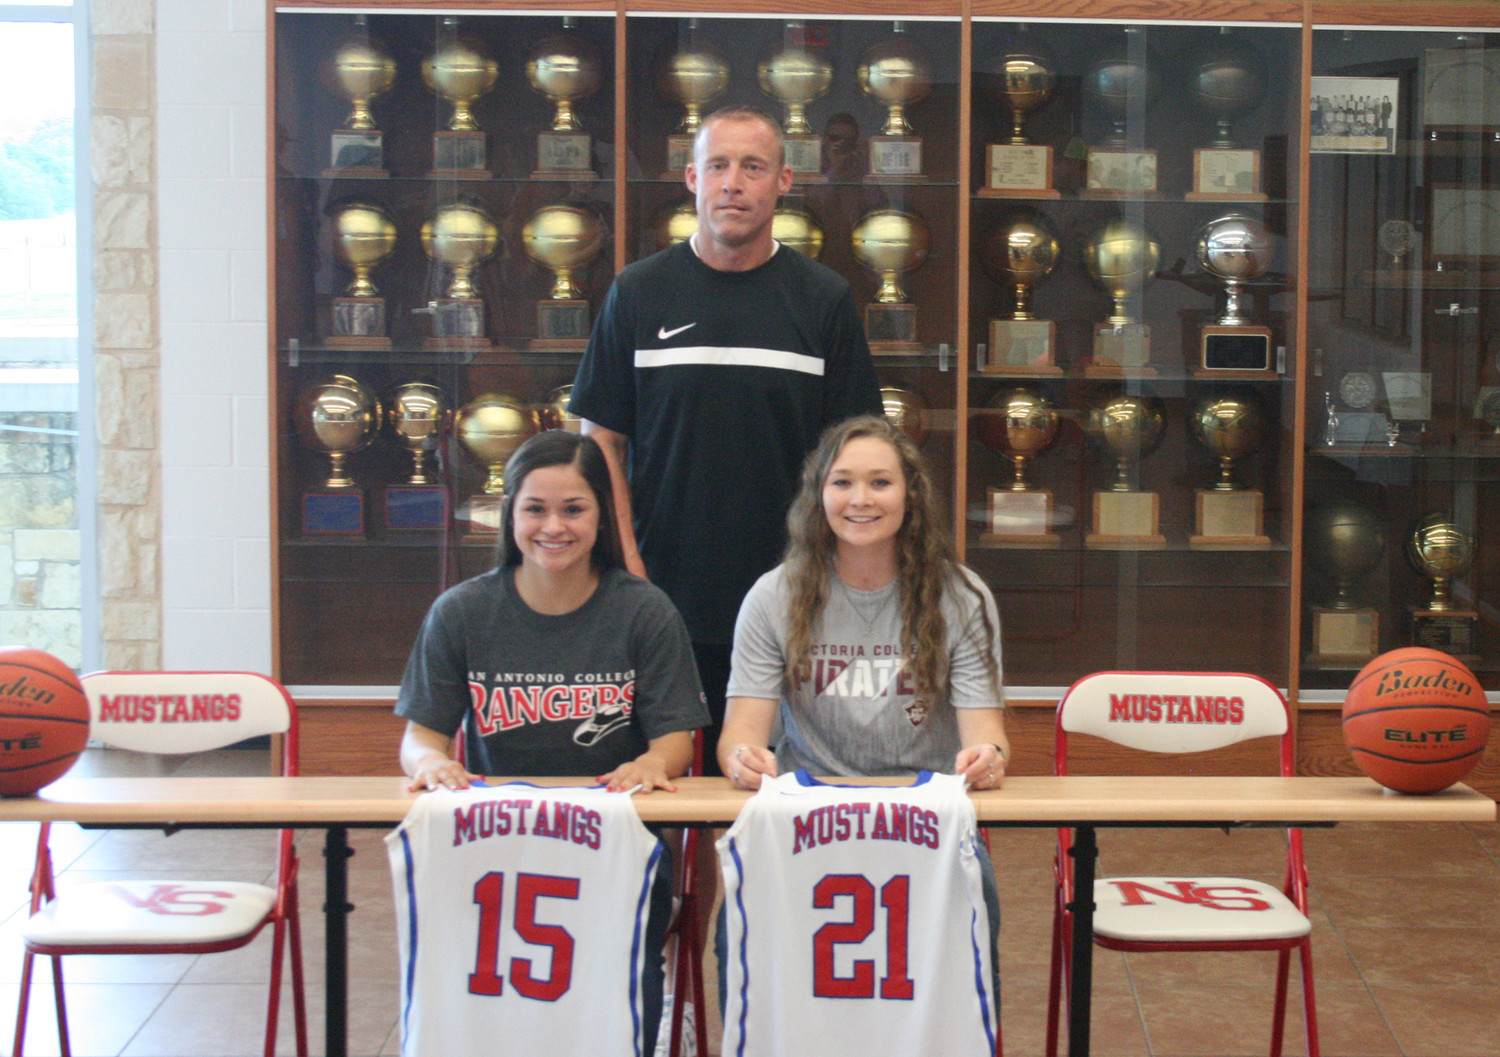 NIXON-SMILEY:
Head coach Scott Jones stands behind athletes Celeste Arriaga (left) and Lexi Trammell (right) who signed their letter of intents to play college basketball. Arriaga signed with San Antonio College while Trammell inked with Victoria College.